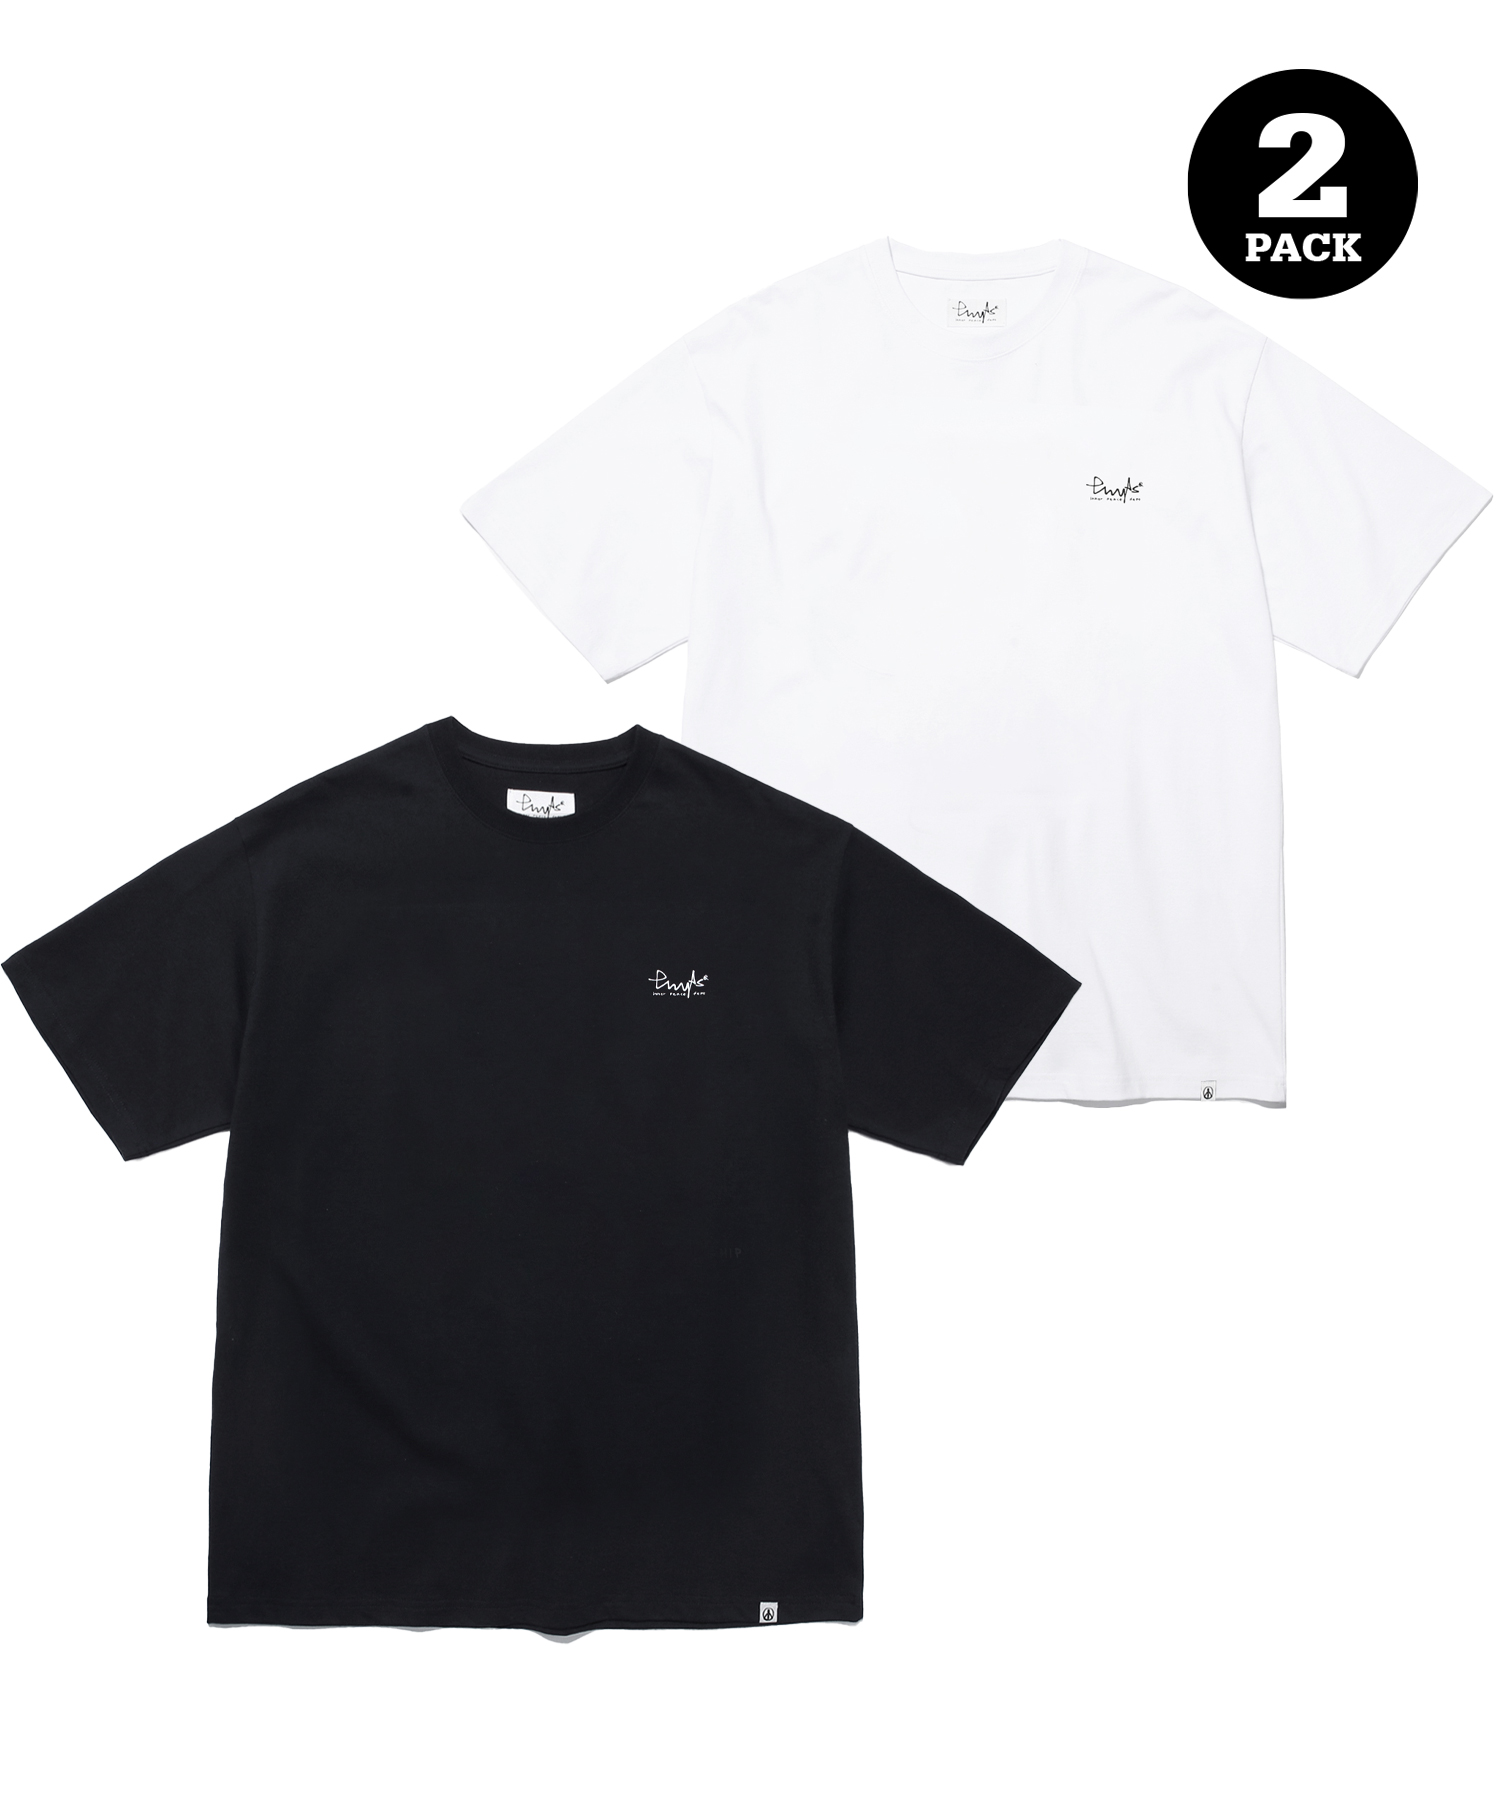 [Coool tee] PHYPS® 2PACK 2MALL LOGO SS WHITE / BLACK